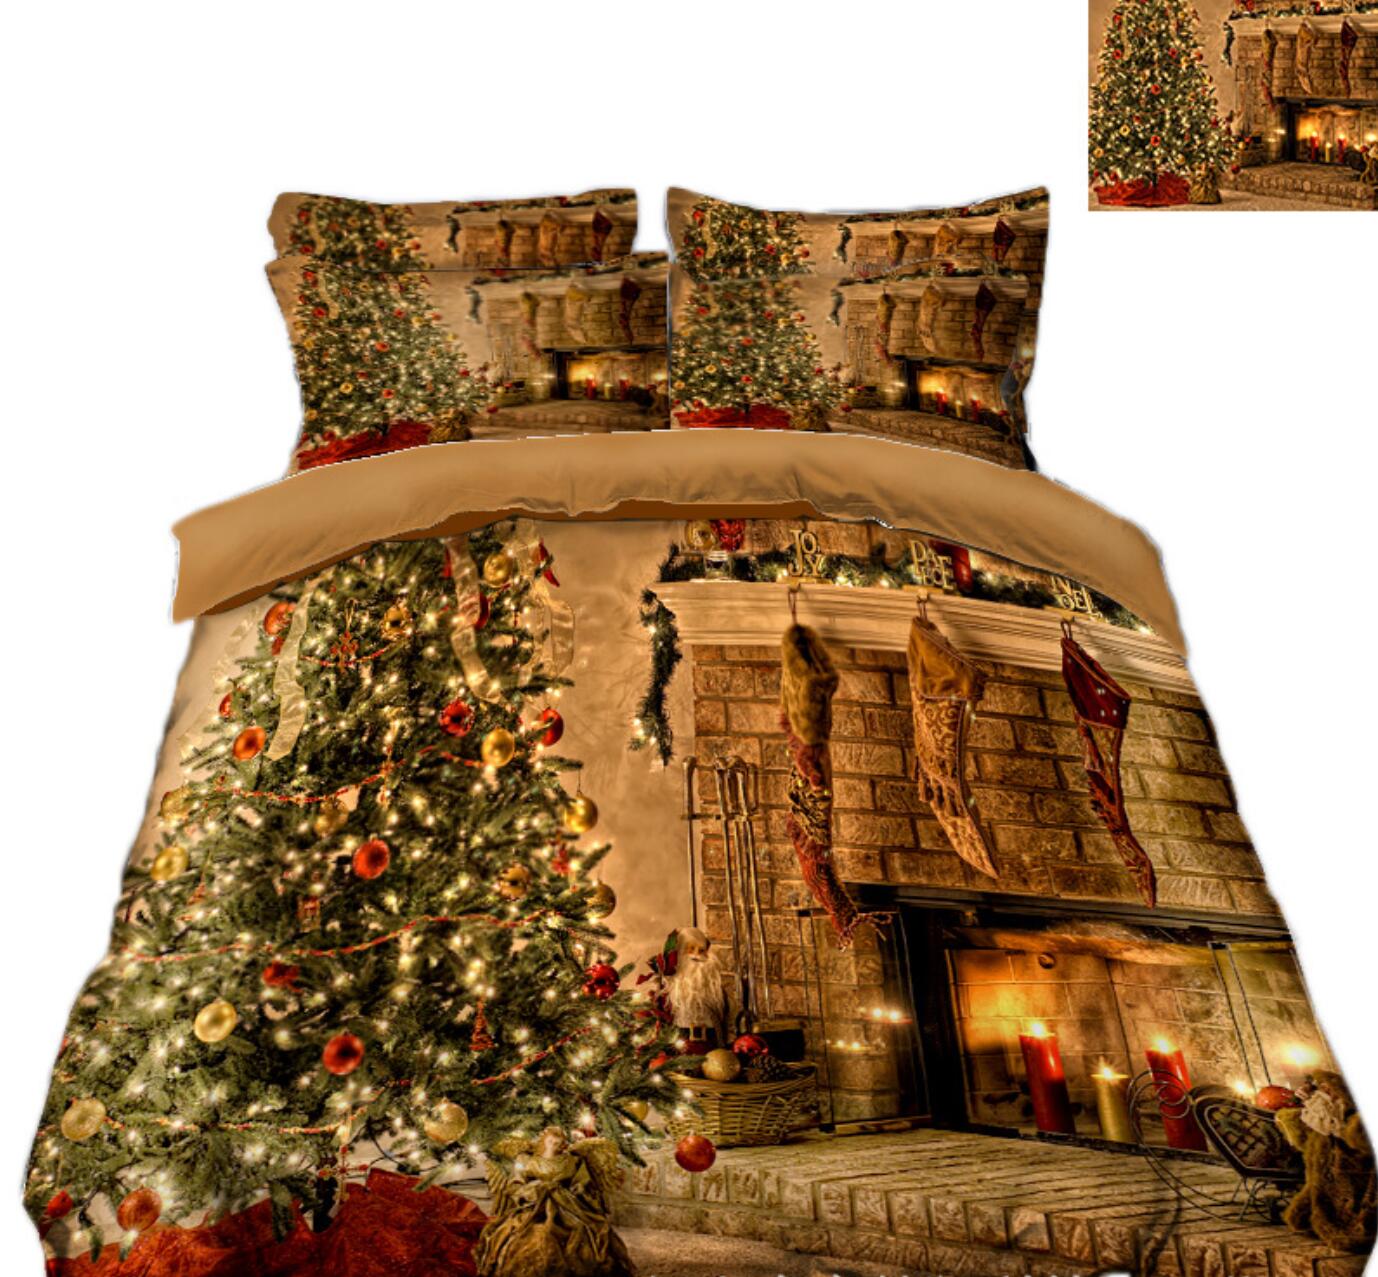 3D Christmas Tree Fireplace 45104 Christmas Quilt Duvet Cover Xmas Bed Pillowcases